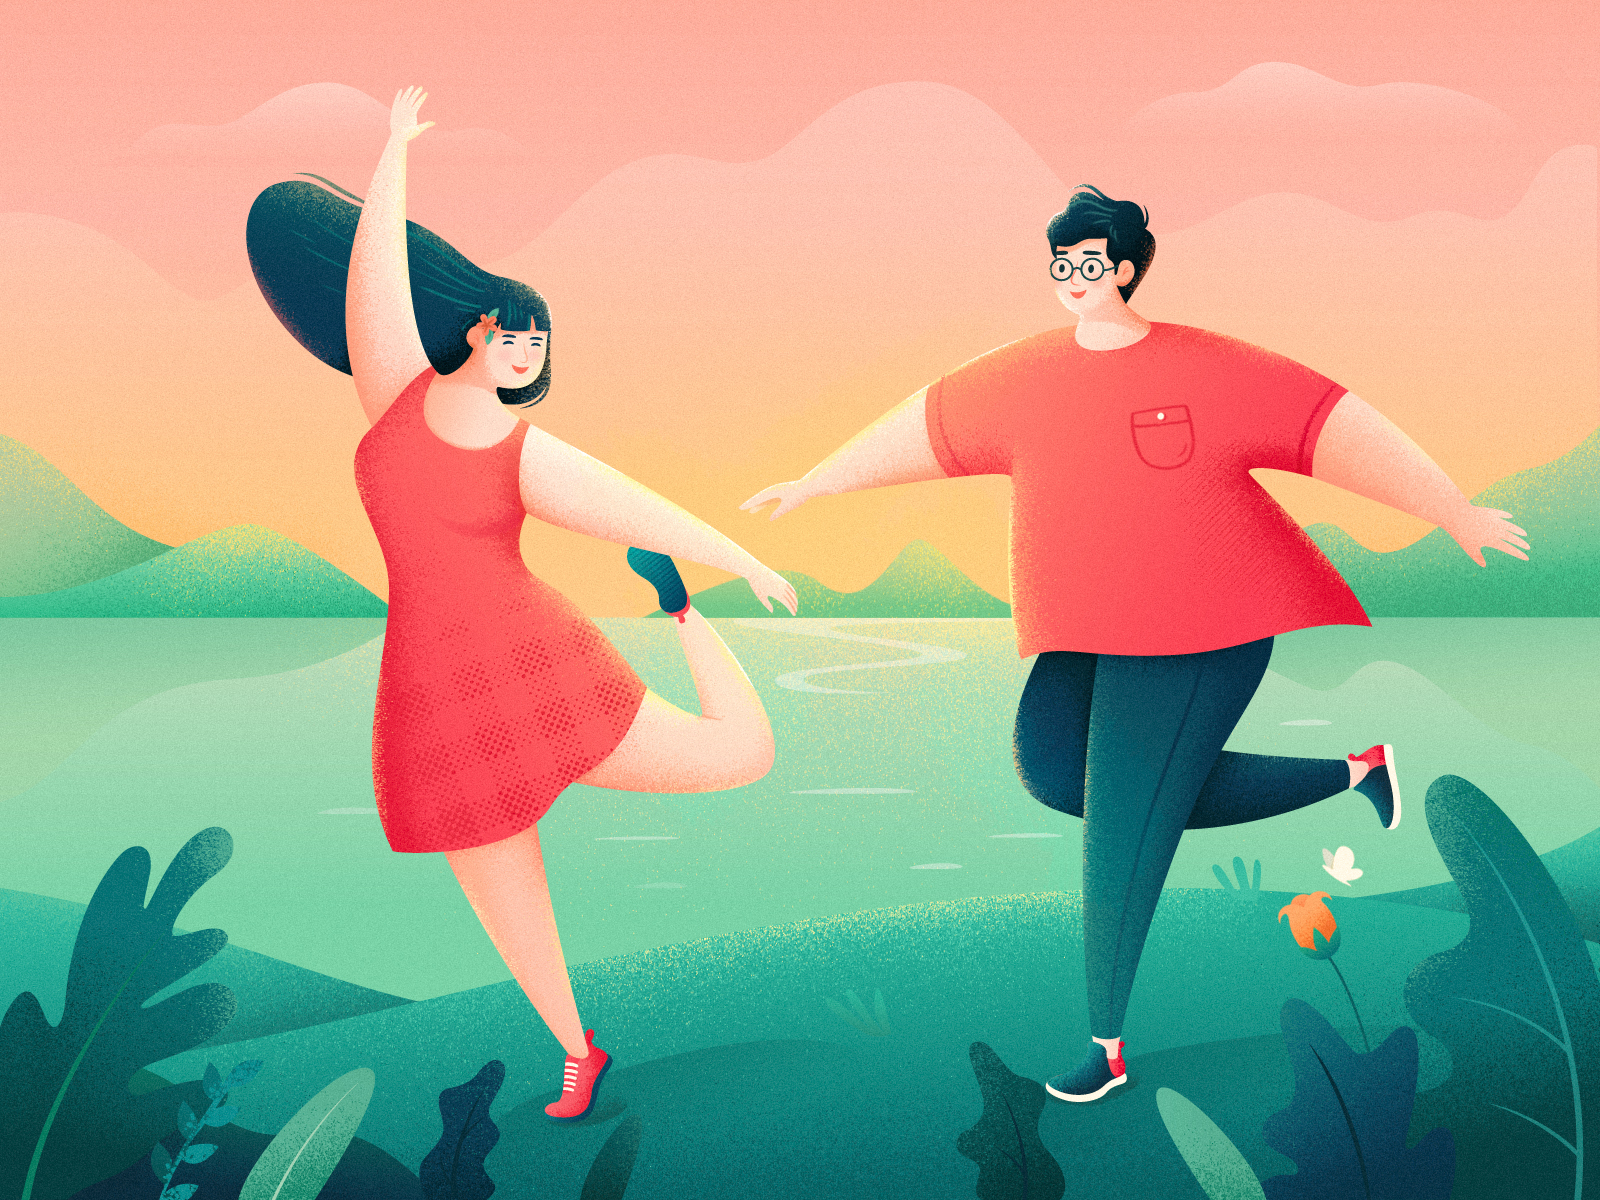 Enjoy The Time Together by Unini on Dribbble